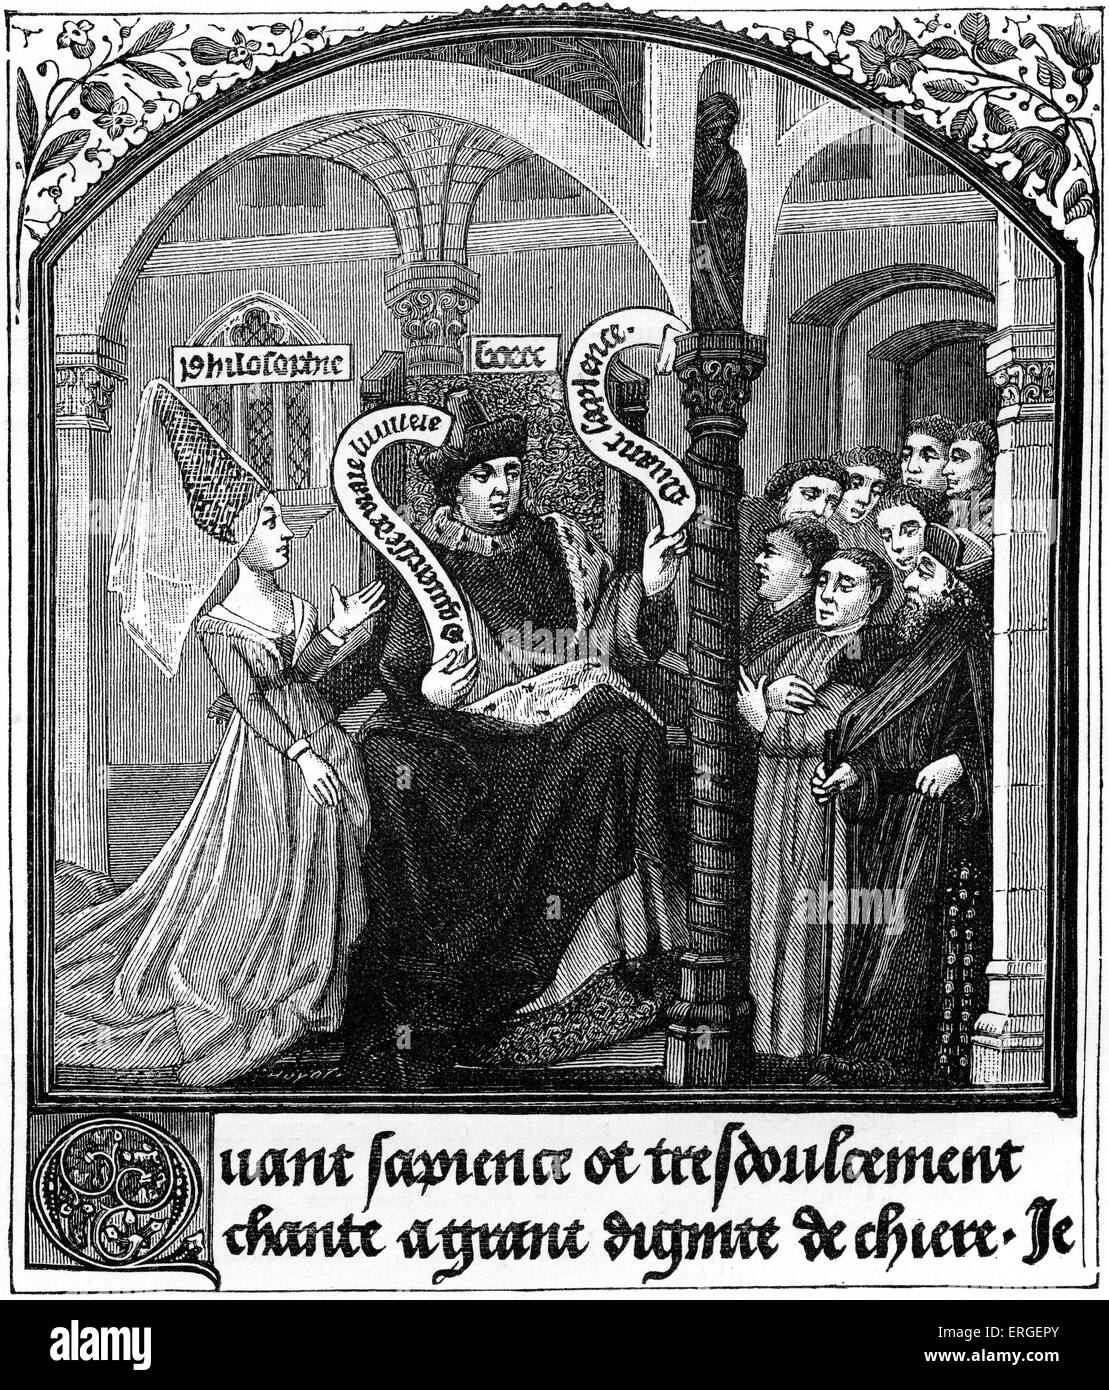 Boethius takes counsel of Dame Philosophy. Allegory, from miniature of 'Consolation of Boethius', translated by Jean de Meung in 15th century manuscript (Library of M. Ambroise Firmin- Didot). B: Anicius Manlius Severinus Boëthius, Rome- born philosopher of the early 6th century, ca. 480–524 or 525 AD. Stock Photo